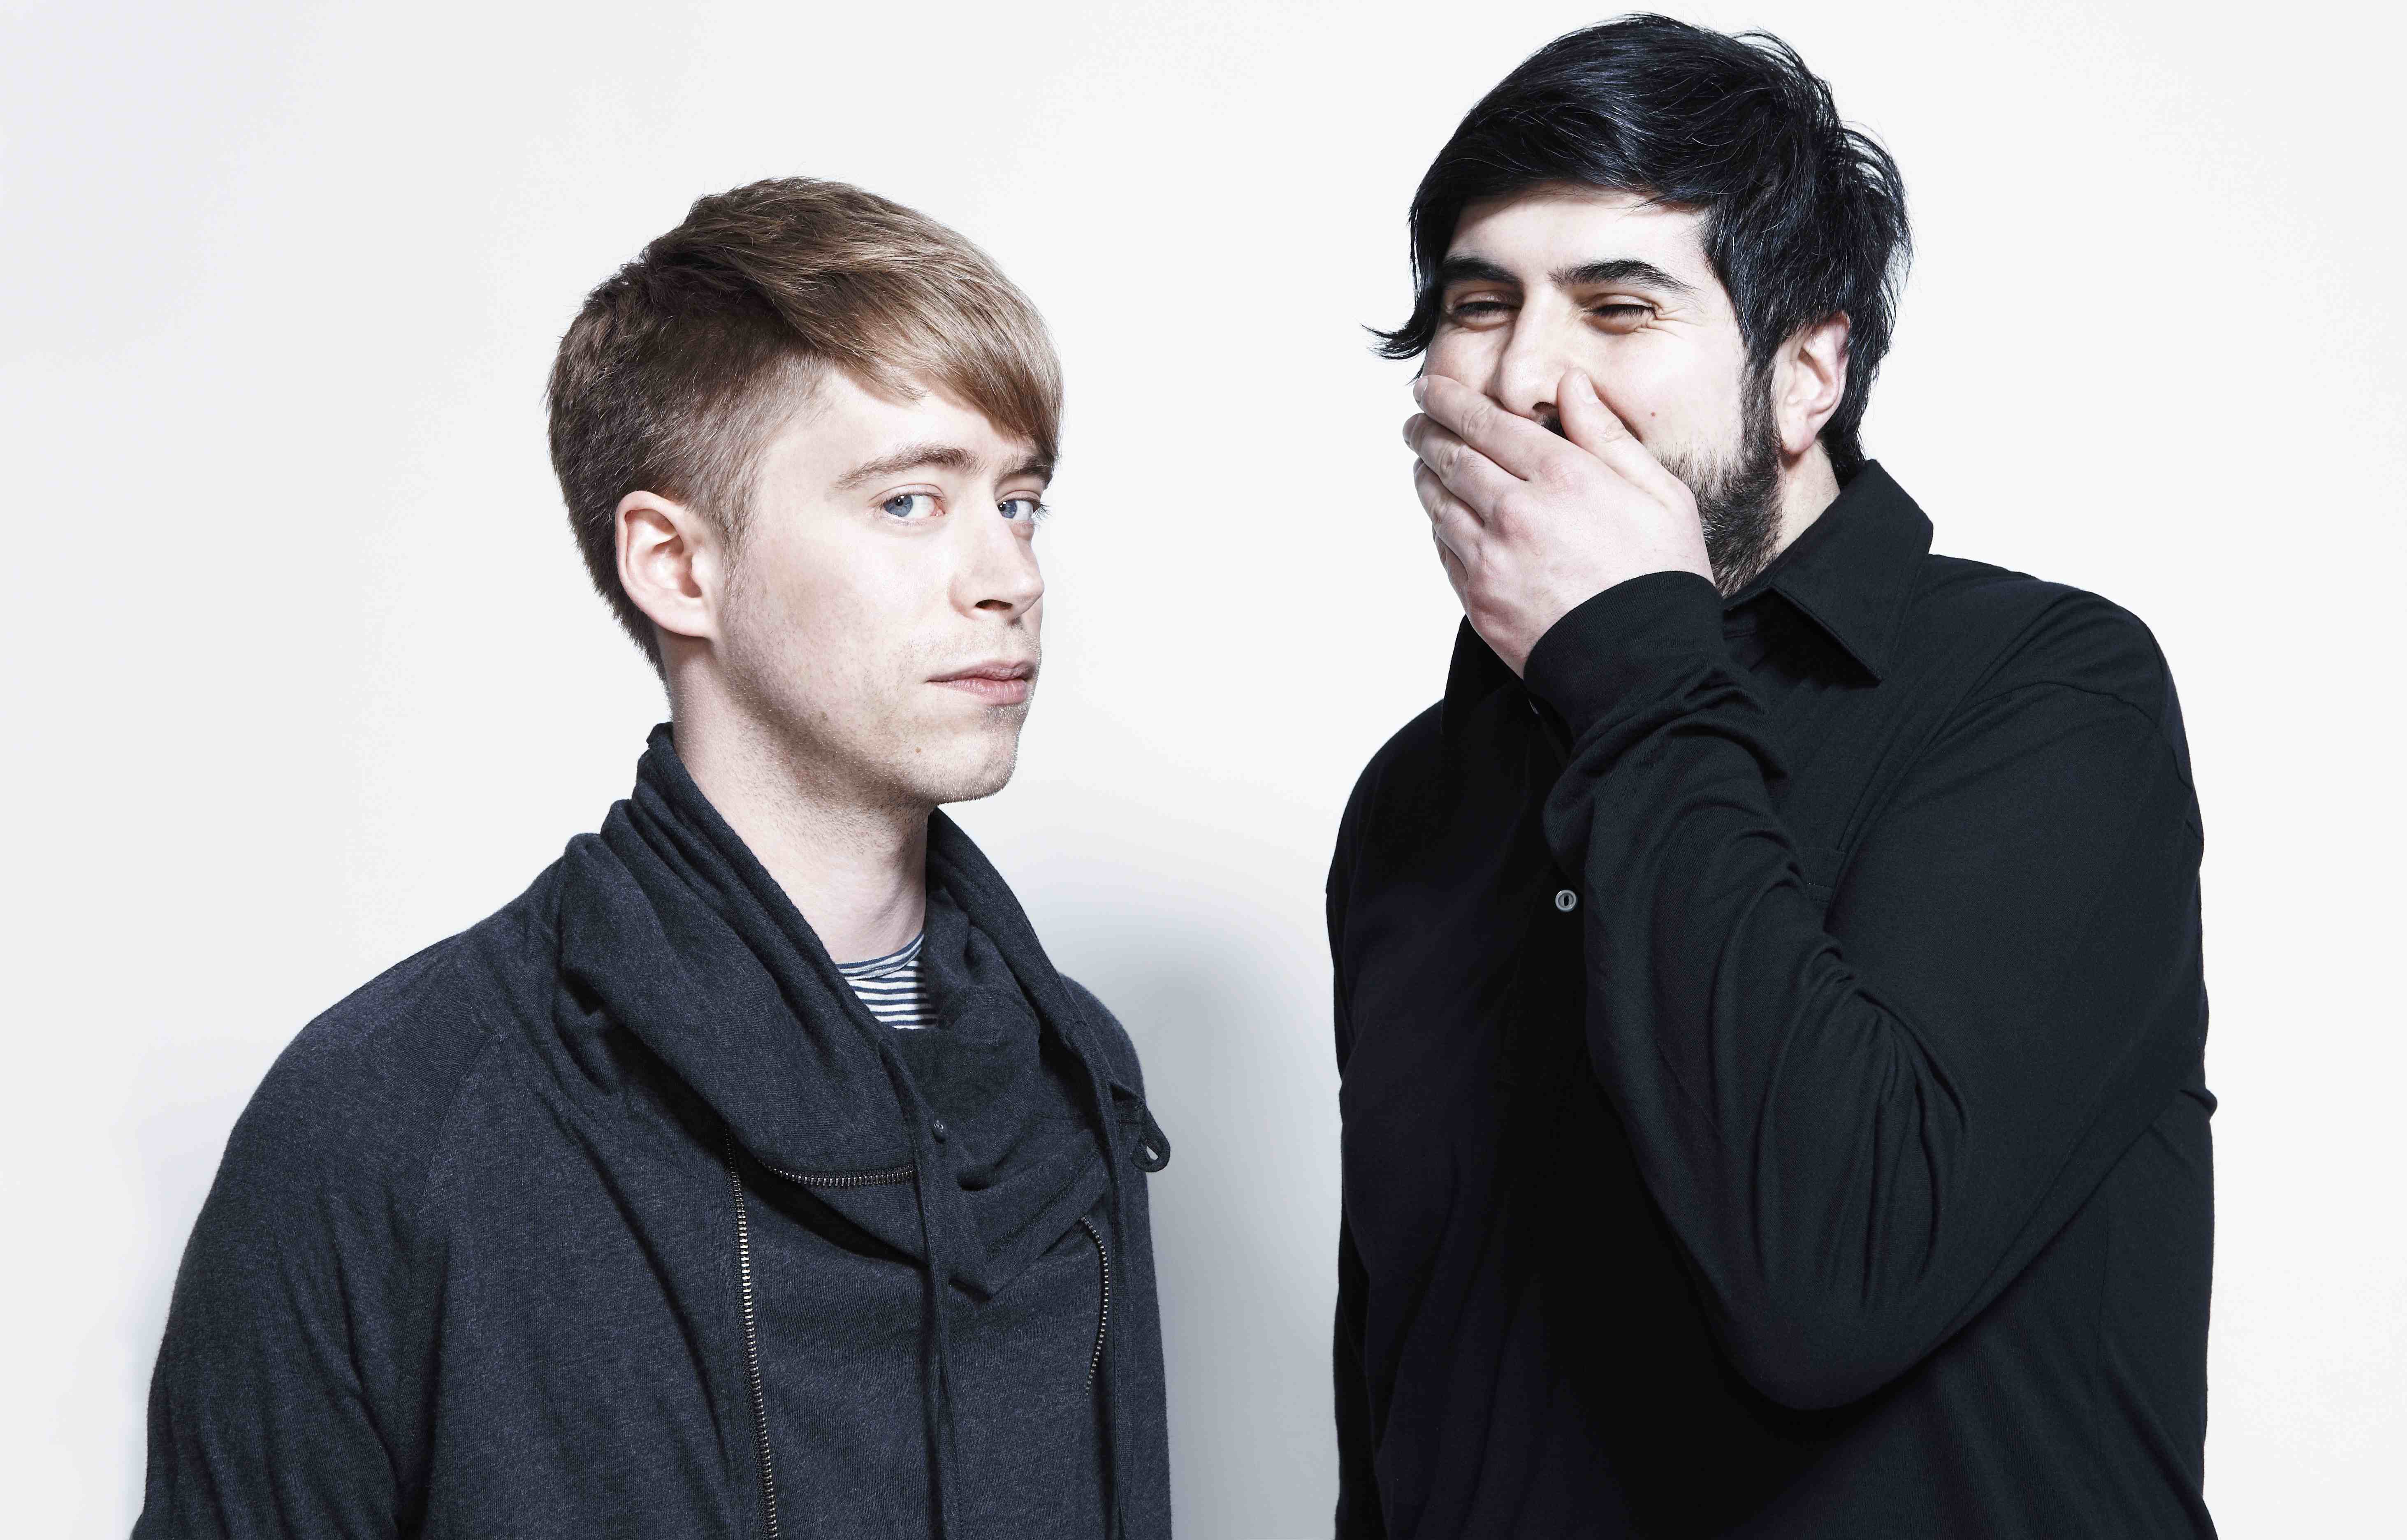 Digitalism Goes High-Tempo Synth Tones in New Song “Jet”